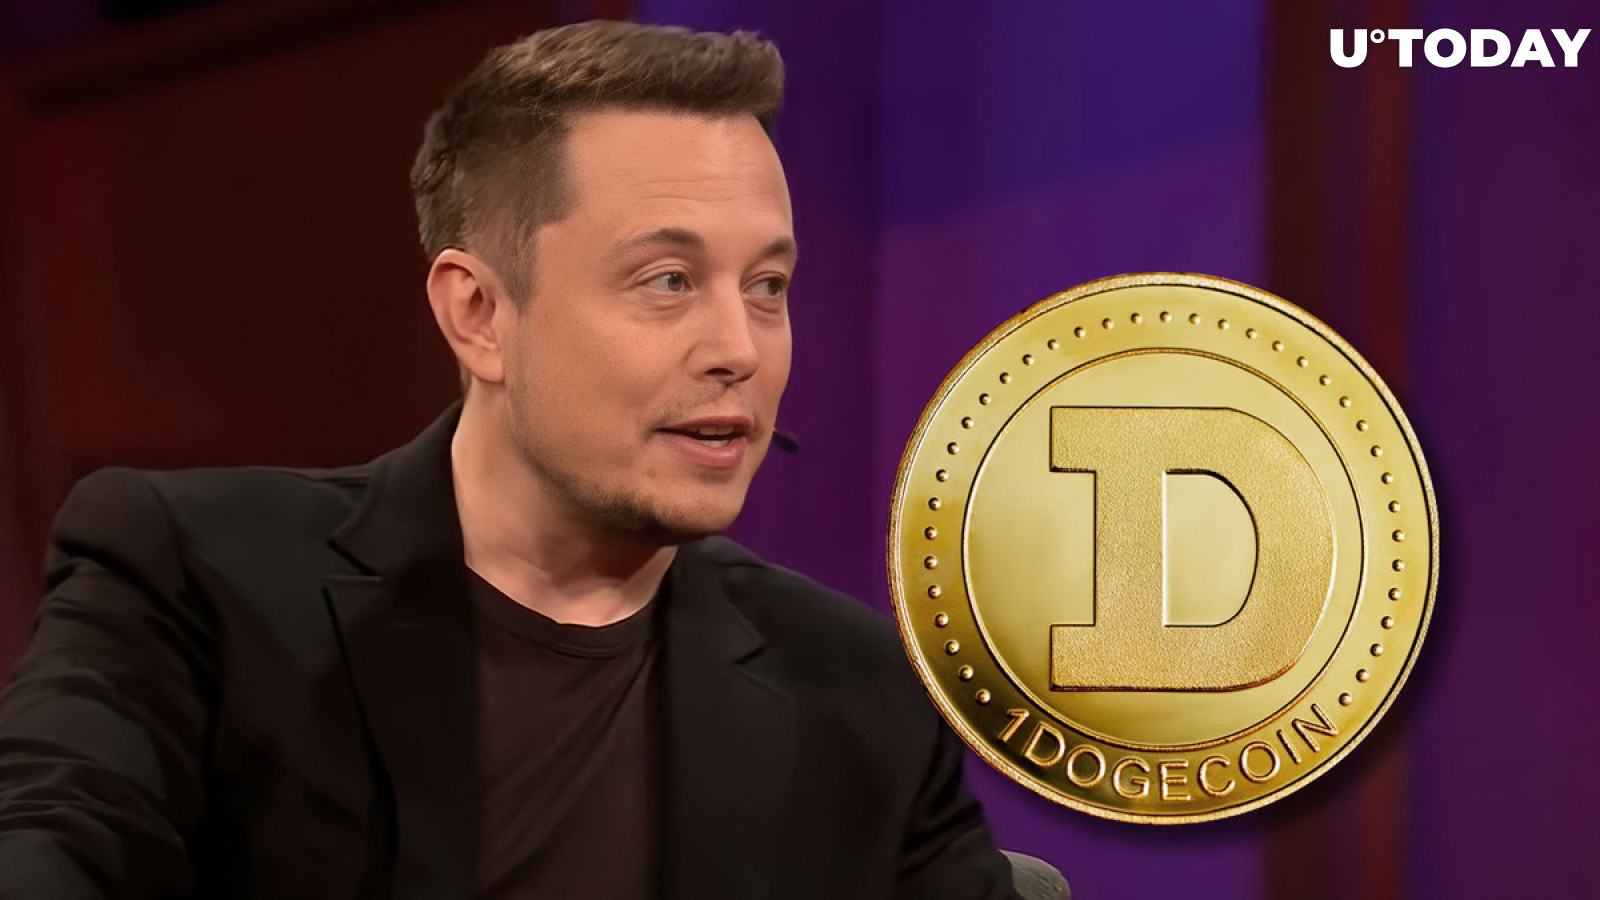 DOGE Price up as Elon Musk Shares New Tweet About Dogecoin